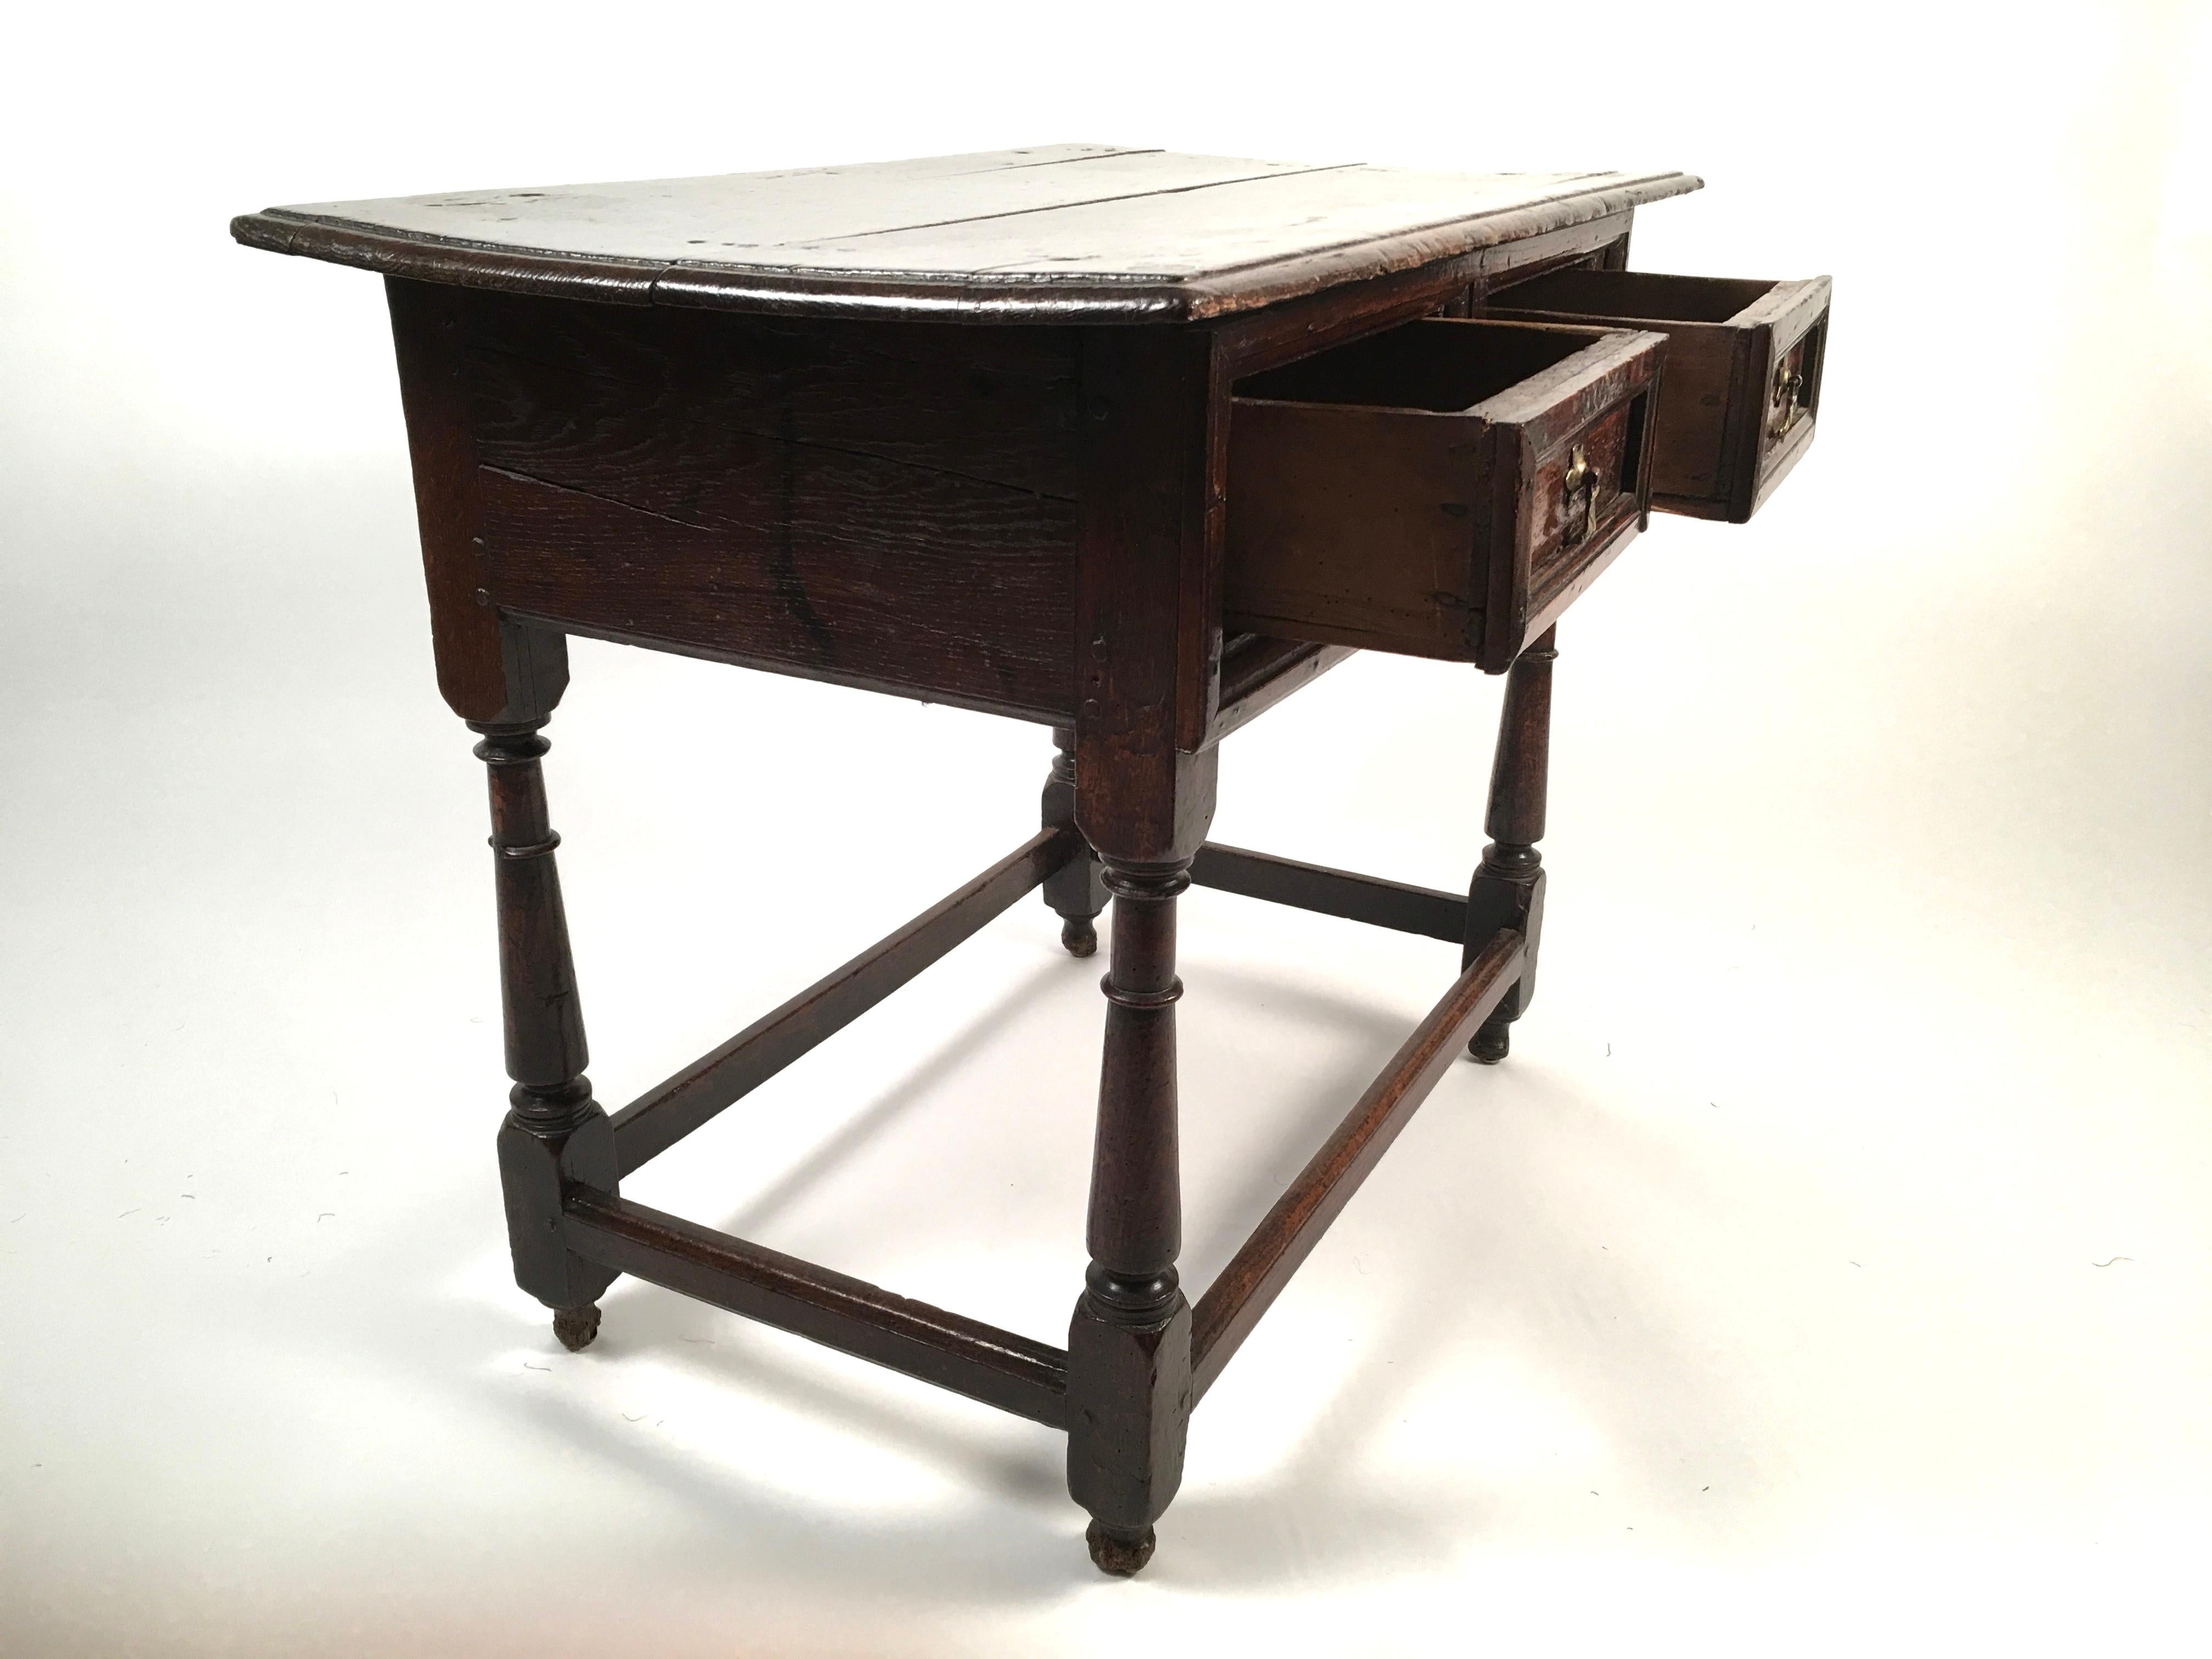 An 18th century English oak tavern table, the rectangular top over two drawers with brass drop handles, raised on four cylindrical, turned legs joined by cross stretchers. Good, rich patina and color.